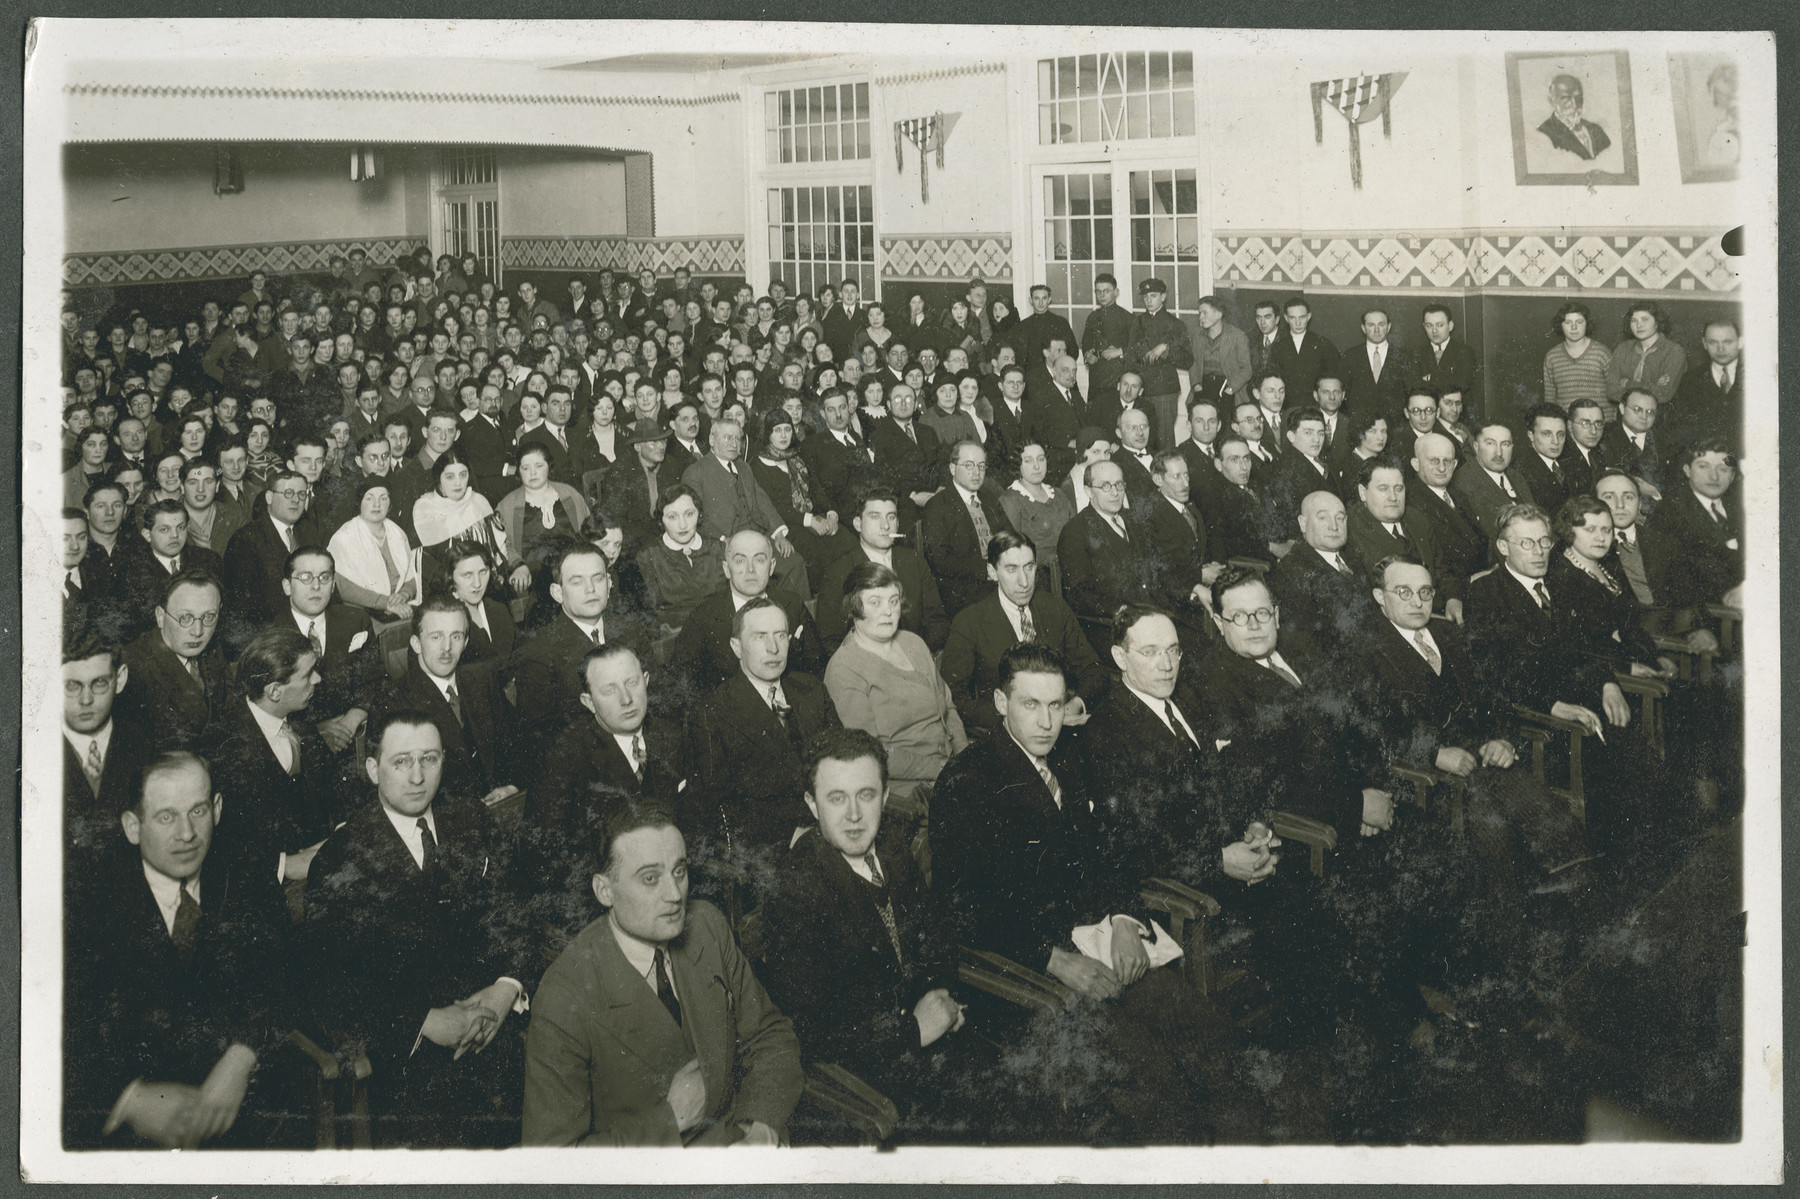 Delegates to what is probably the 12th Zionist Congress.

Samuel Gotz is pictured in the second row, sixth from the right.